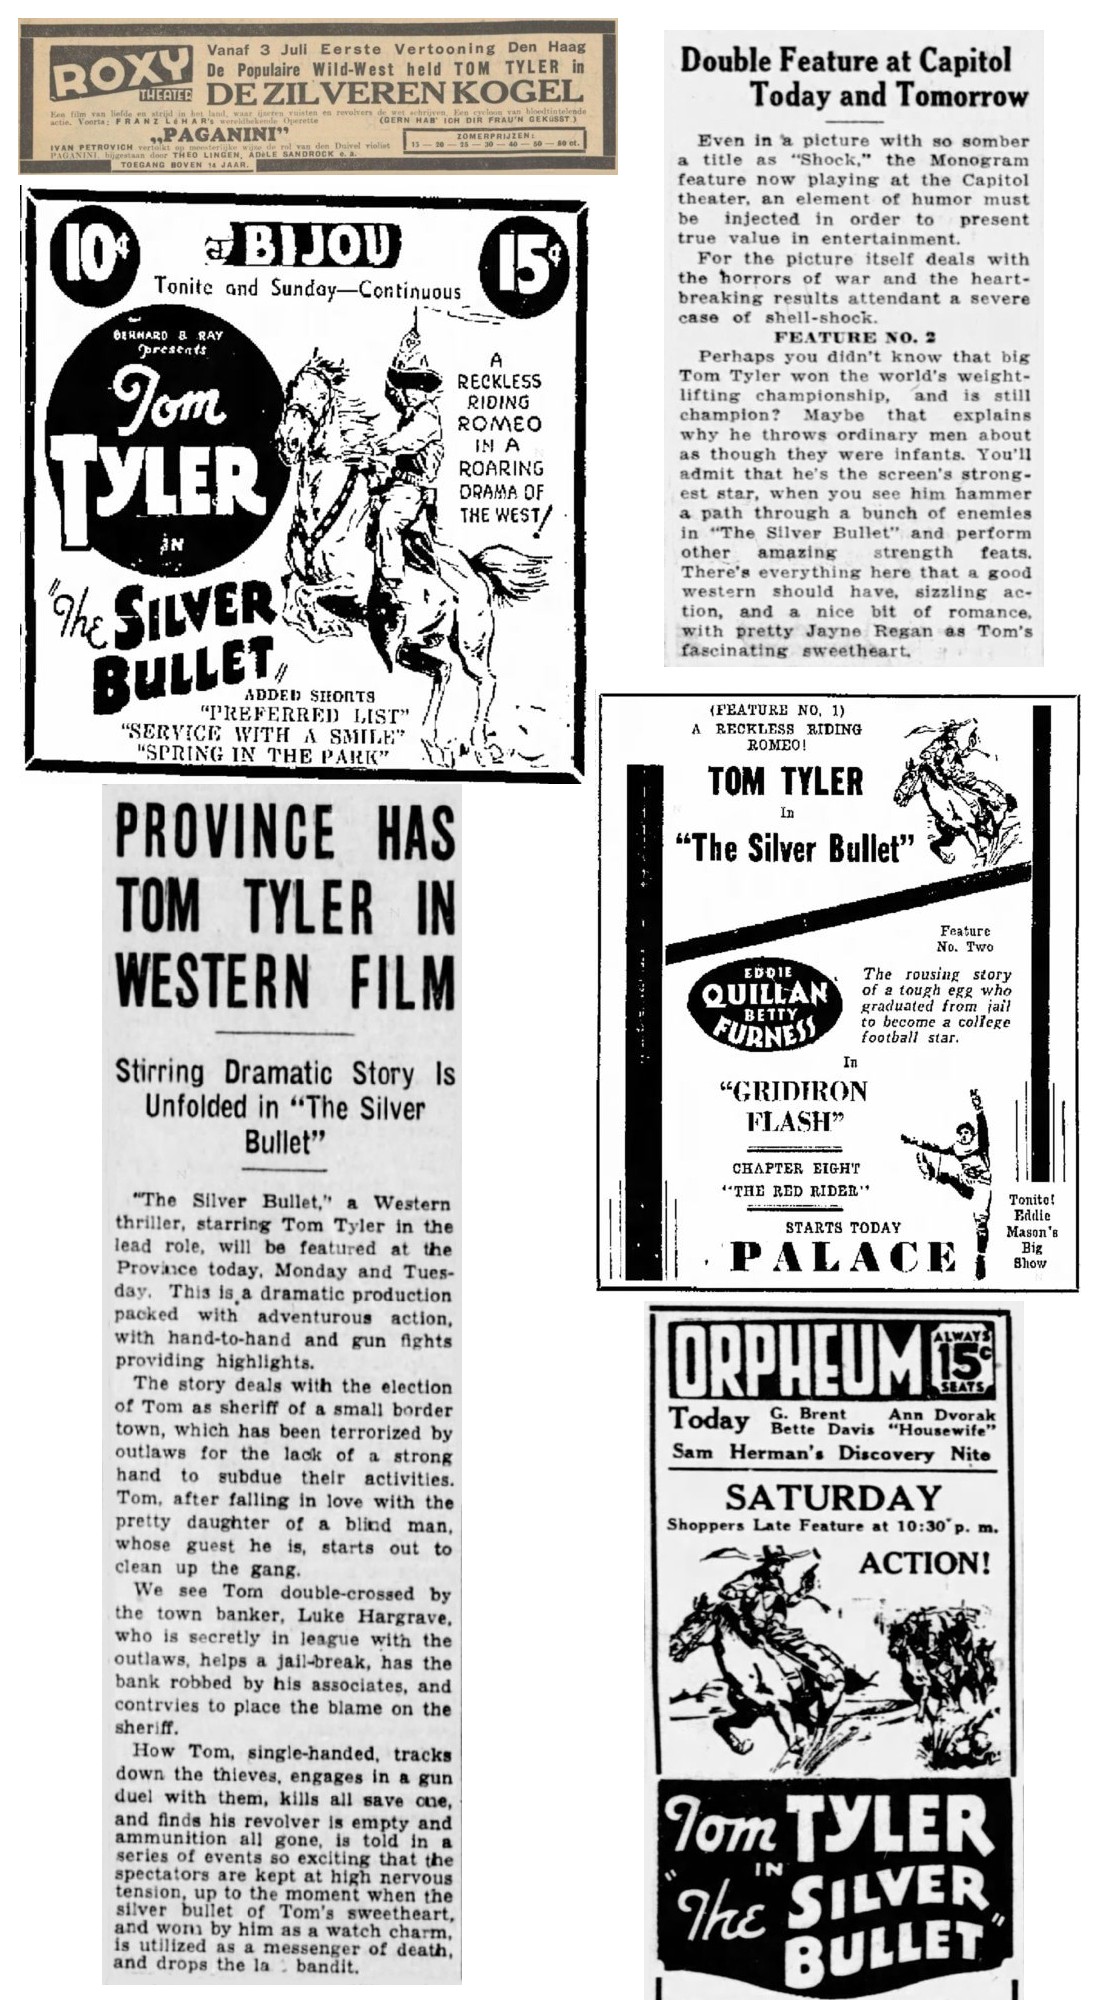 The Silver Bullet cinema ads film reviews